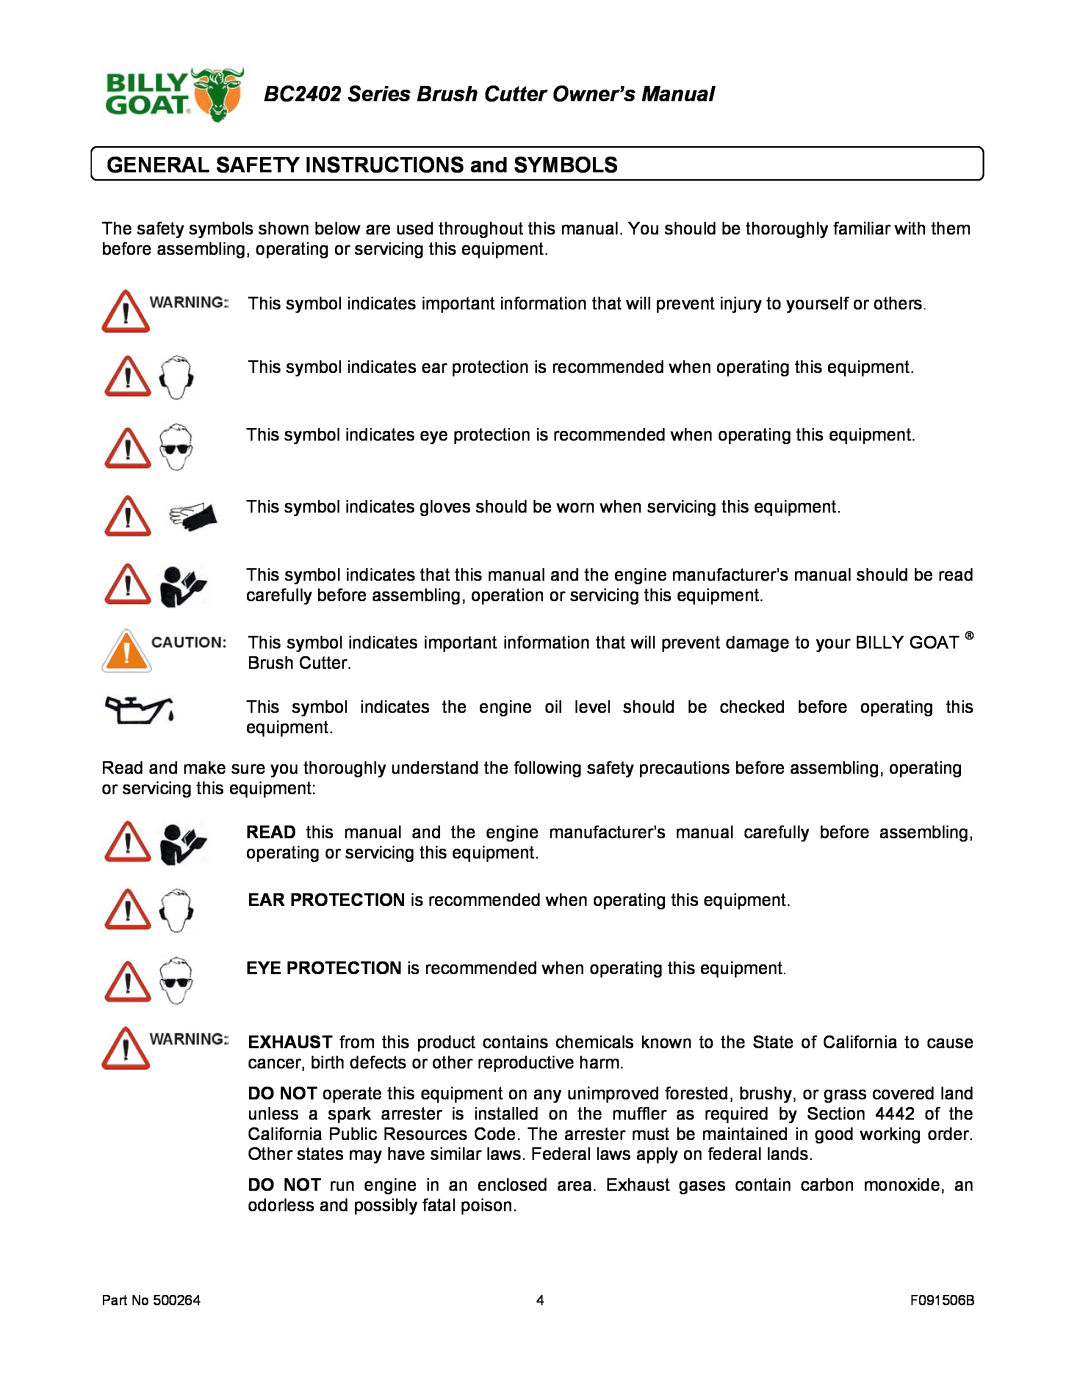 Billy Goat BC2402 owner manual GENERAL SAFETY INSTRUCTIONS and SYMBOLS 